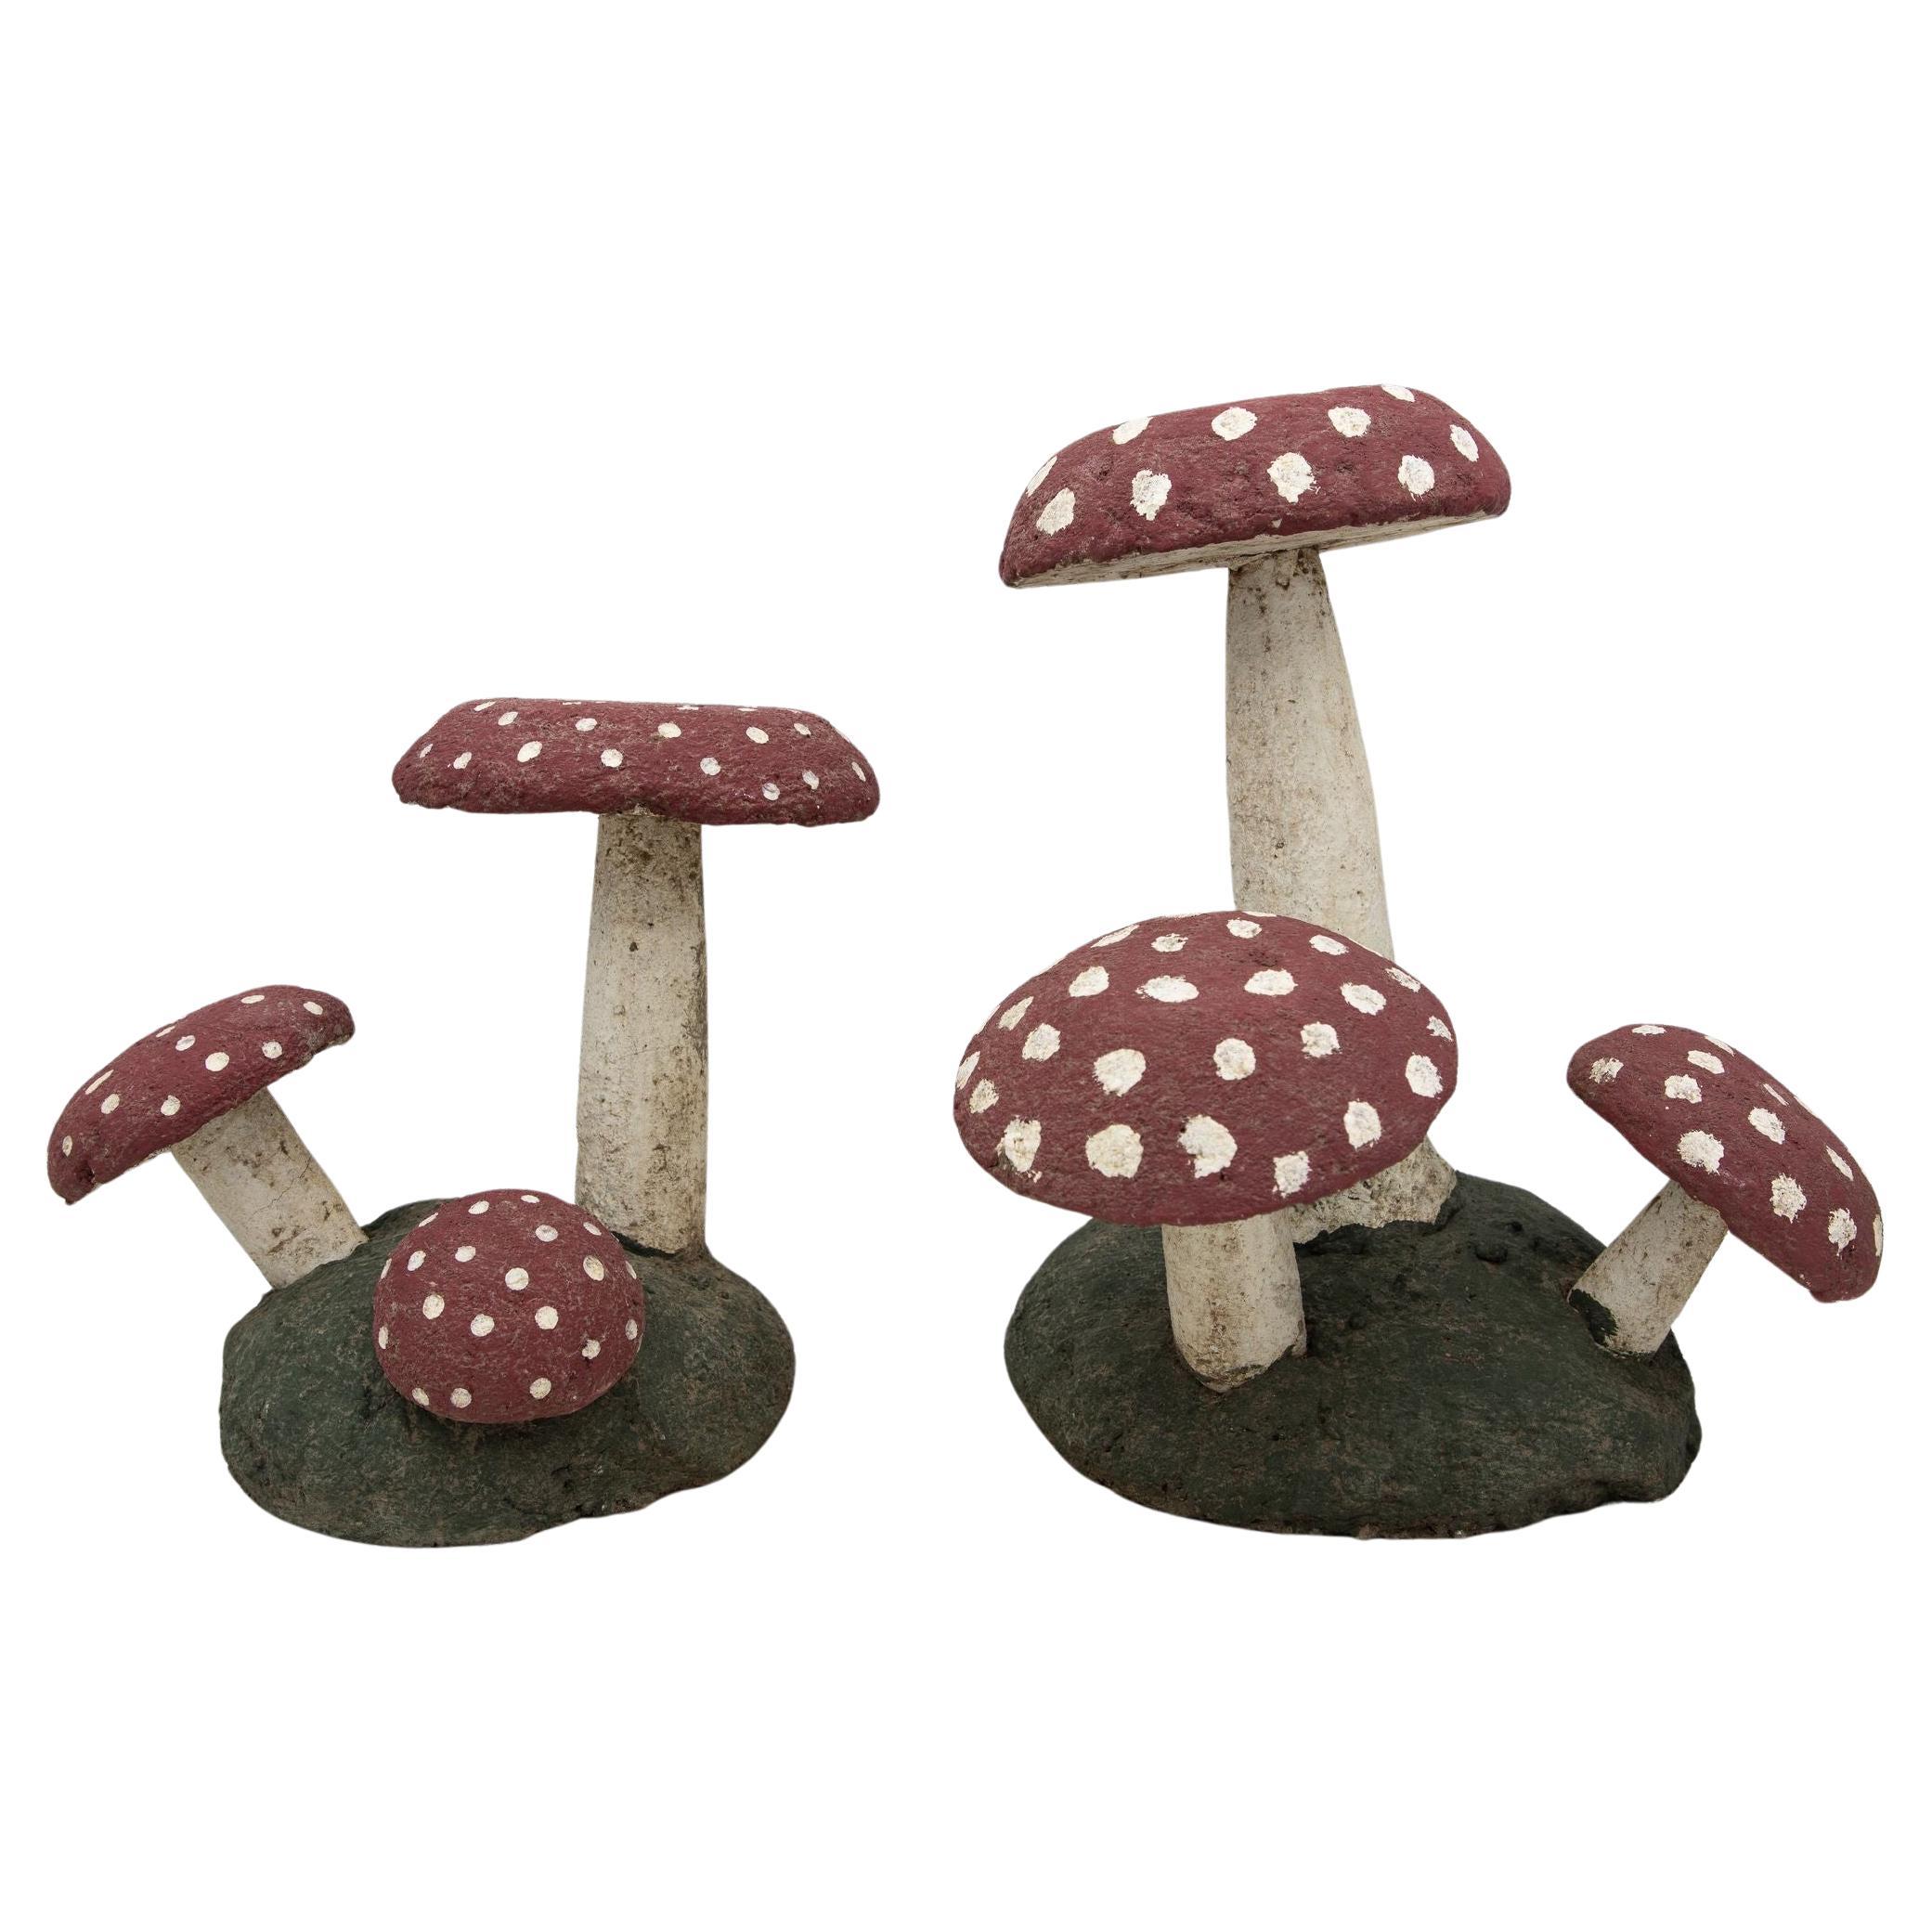 Pair Vintage Painted Stone Toadstools Mushrooms with Red Caps For Sale